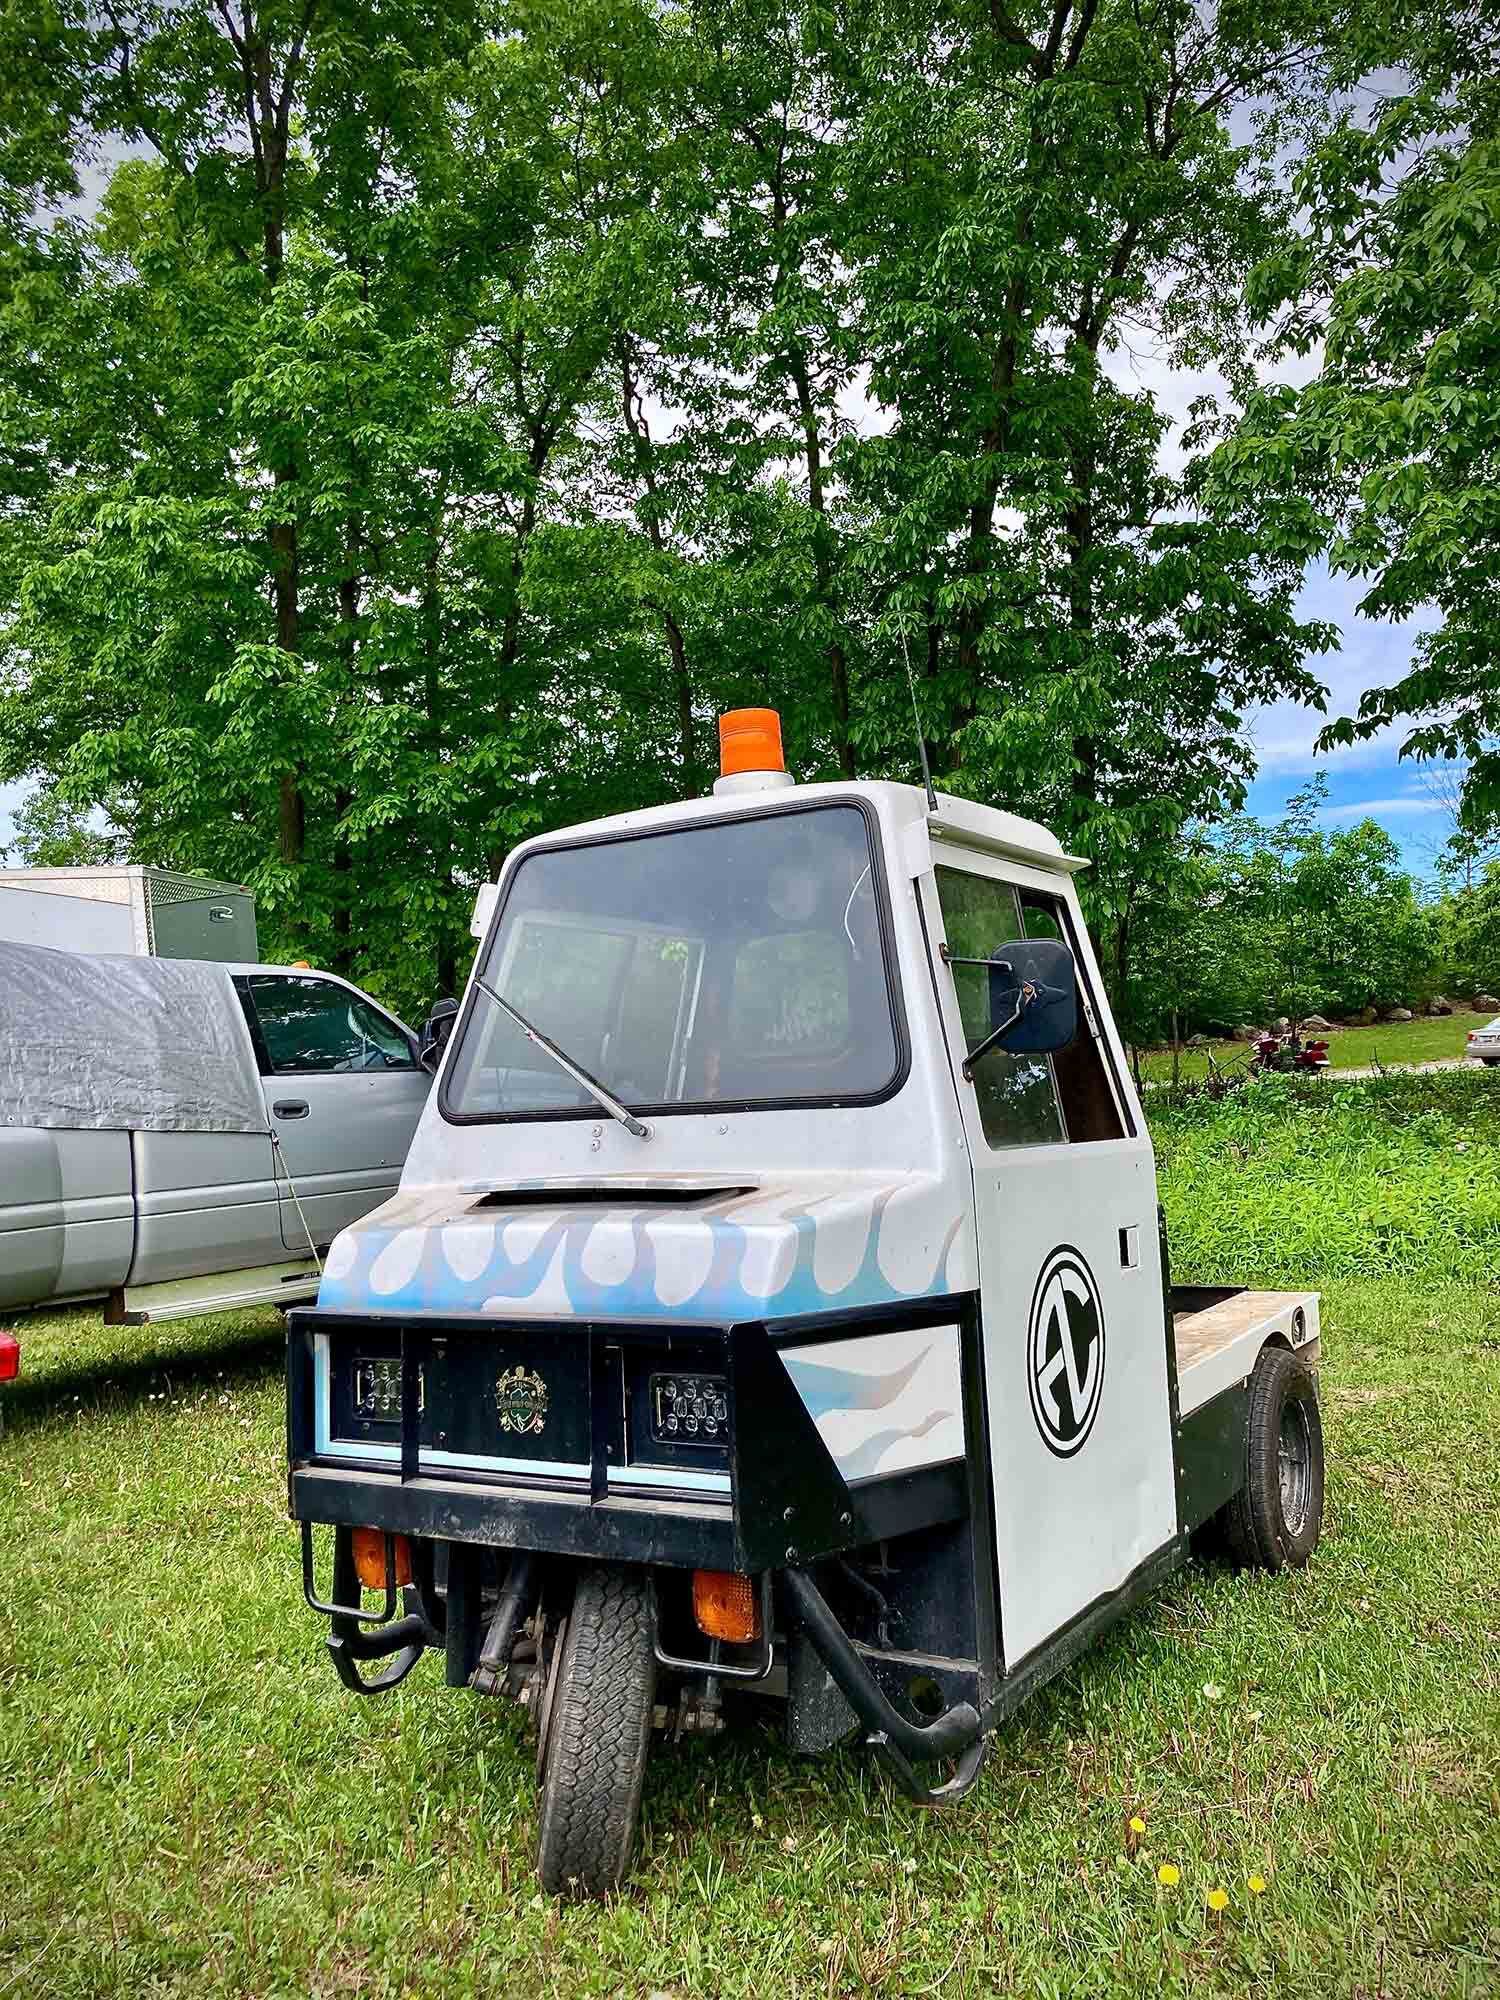 Score at the airport auction: likely a Piaggio Ape.